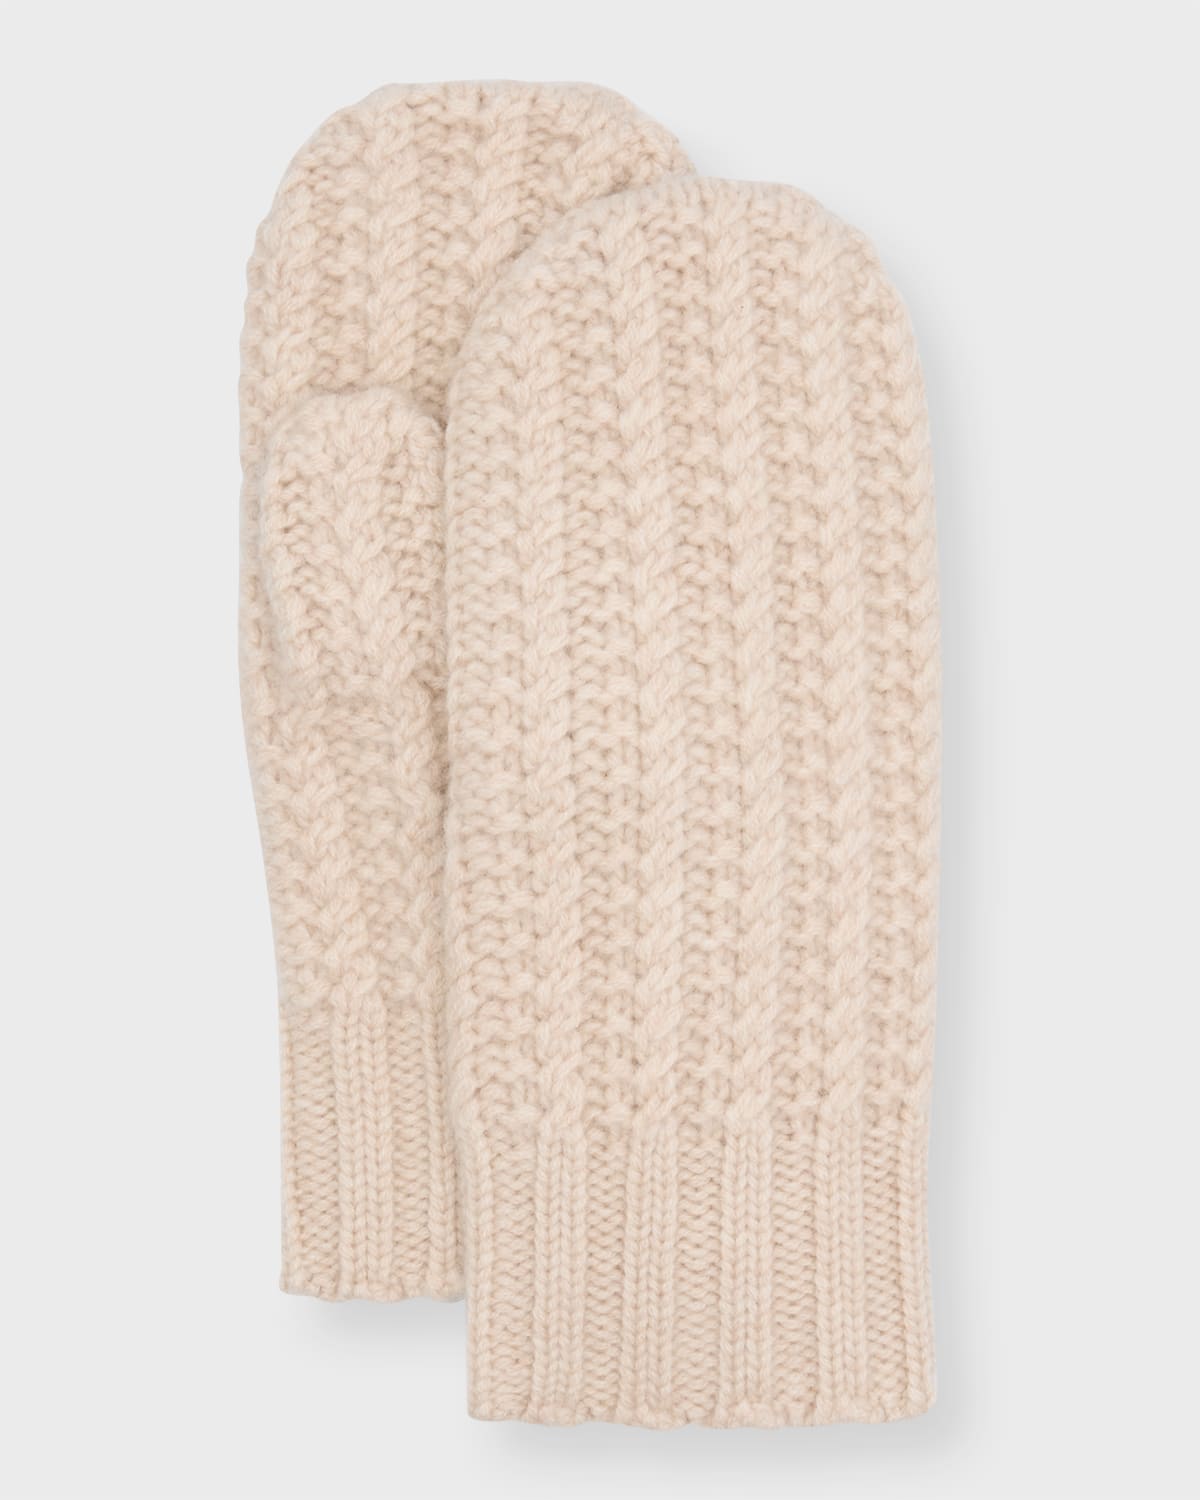 Sofia Cashmere Chunky Textured Cashmere Mittens In Oatmeal